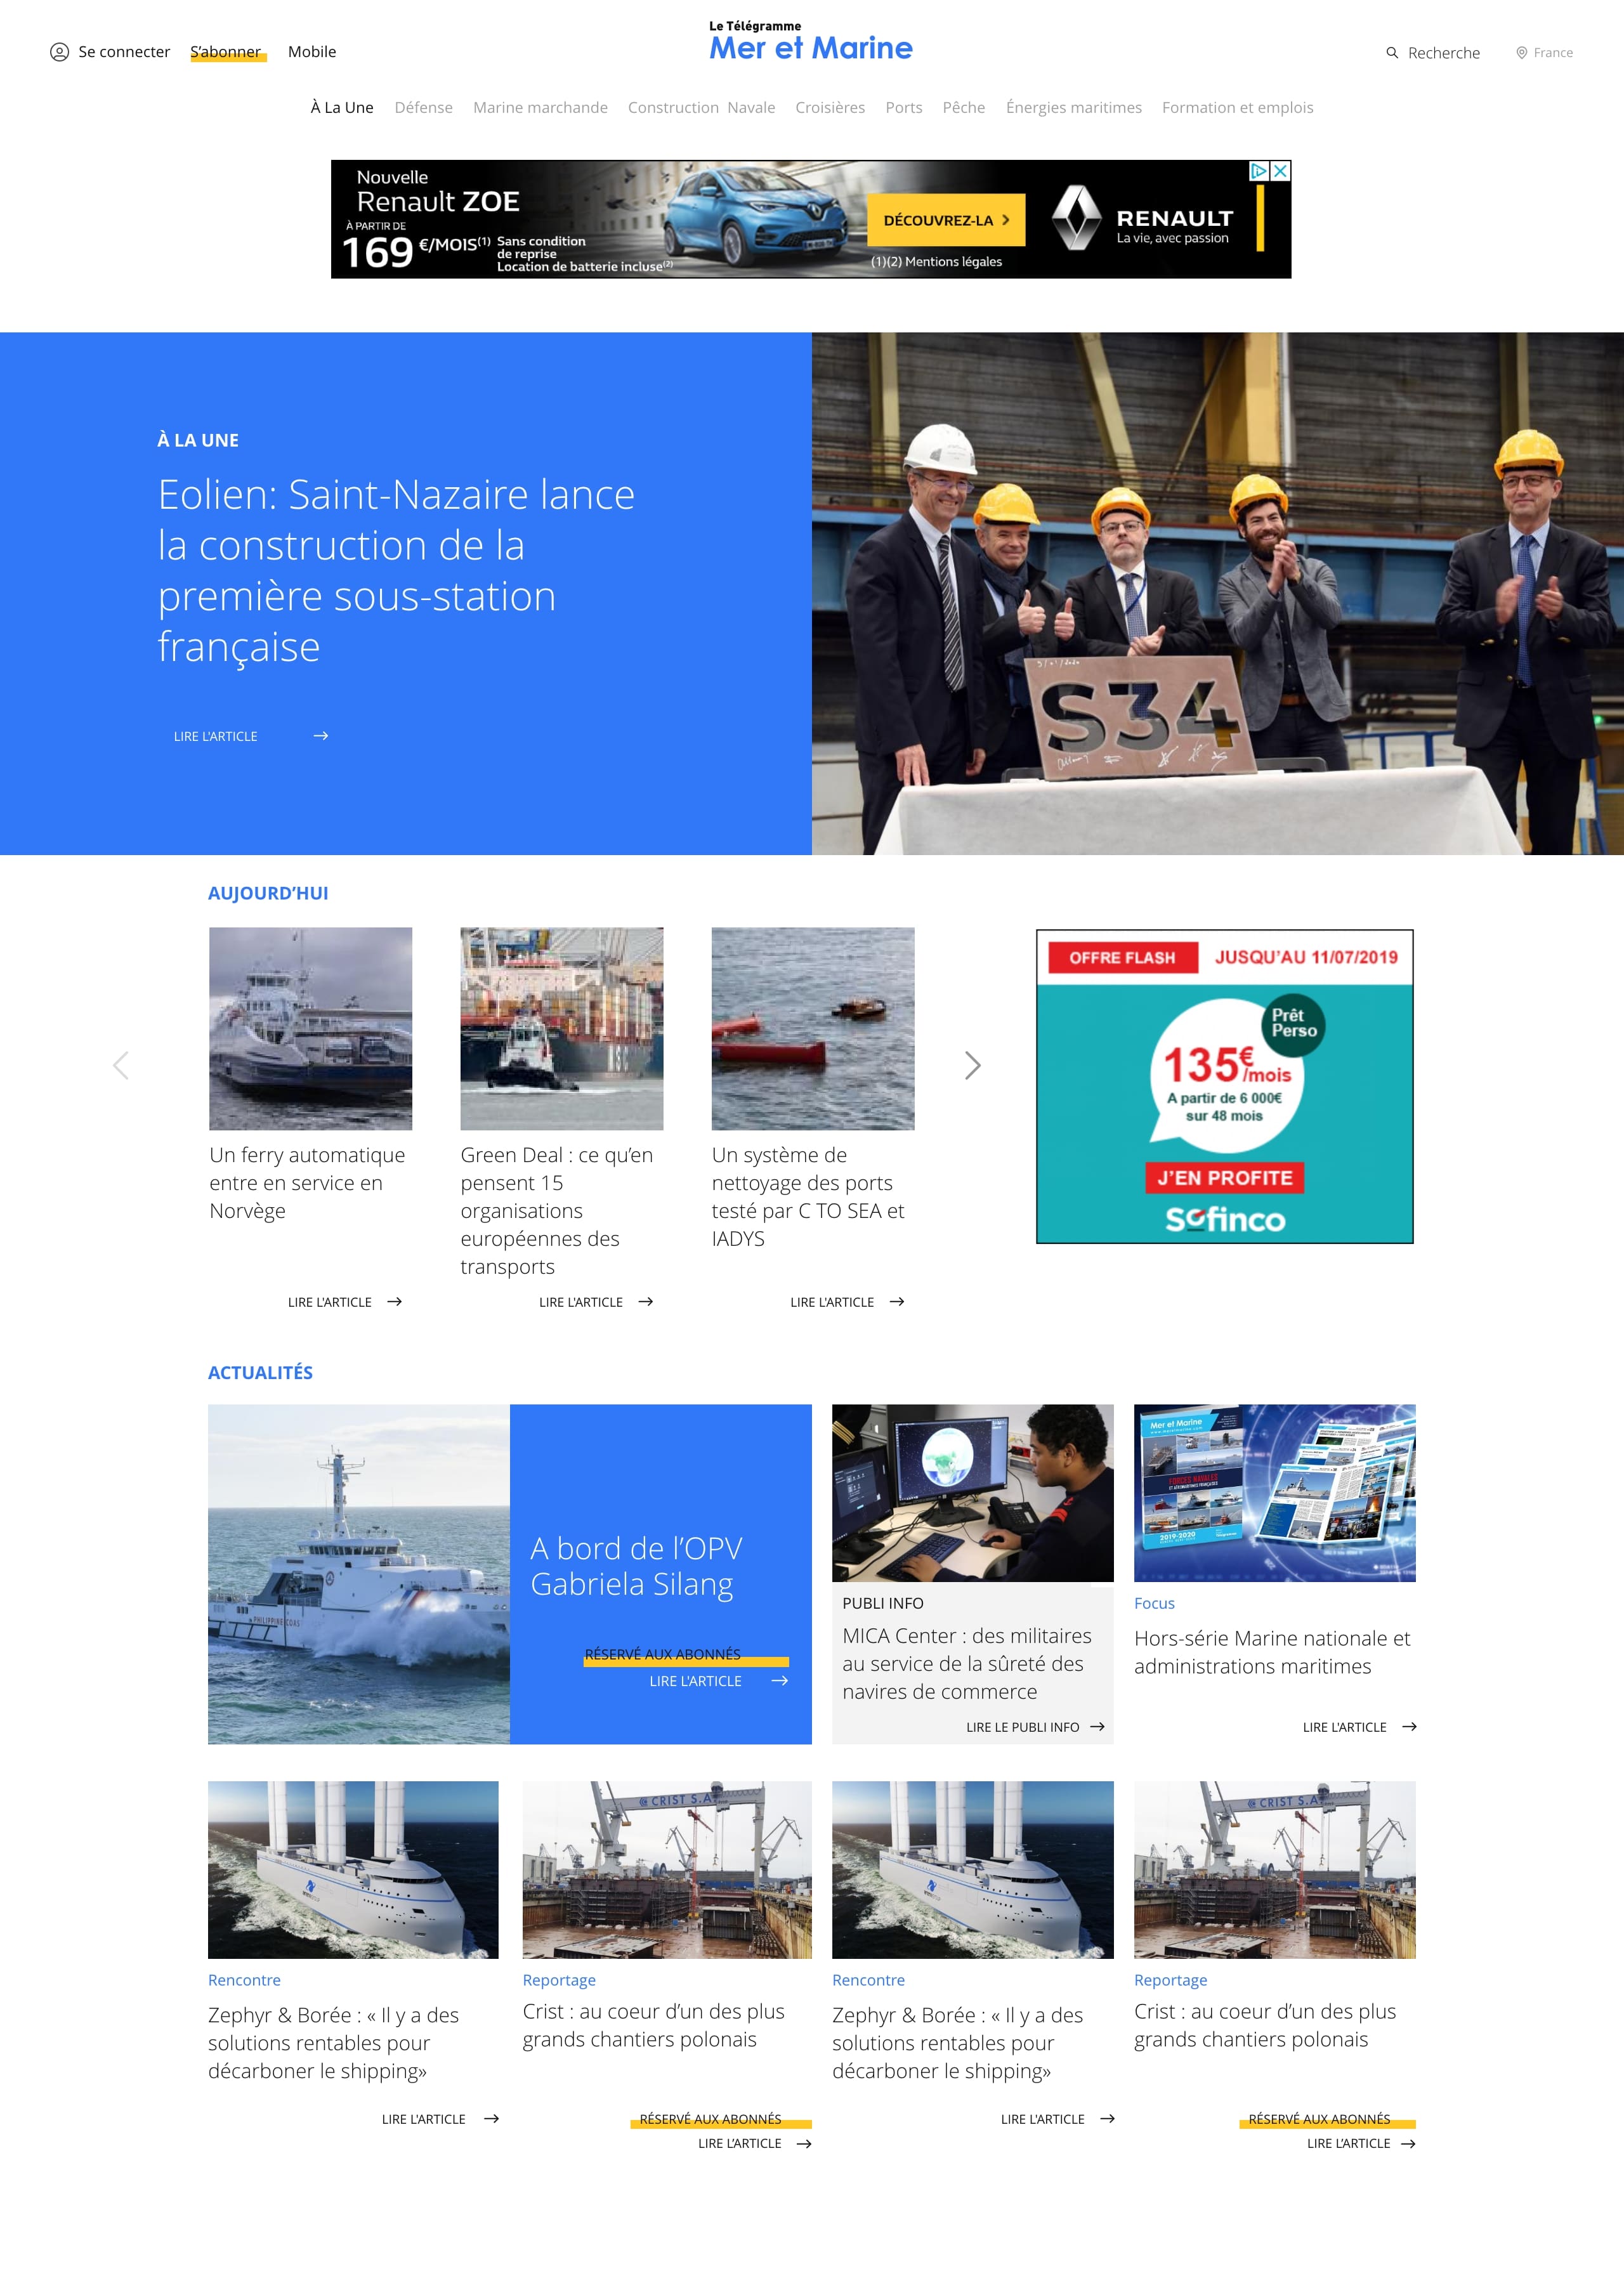 Redesign of the homepage of the website Mer et Marine